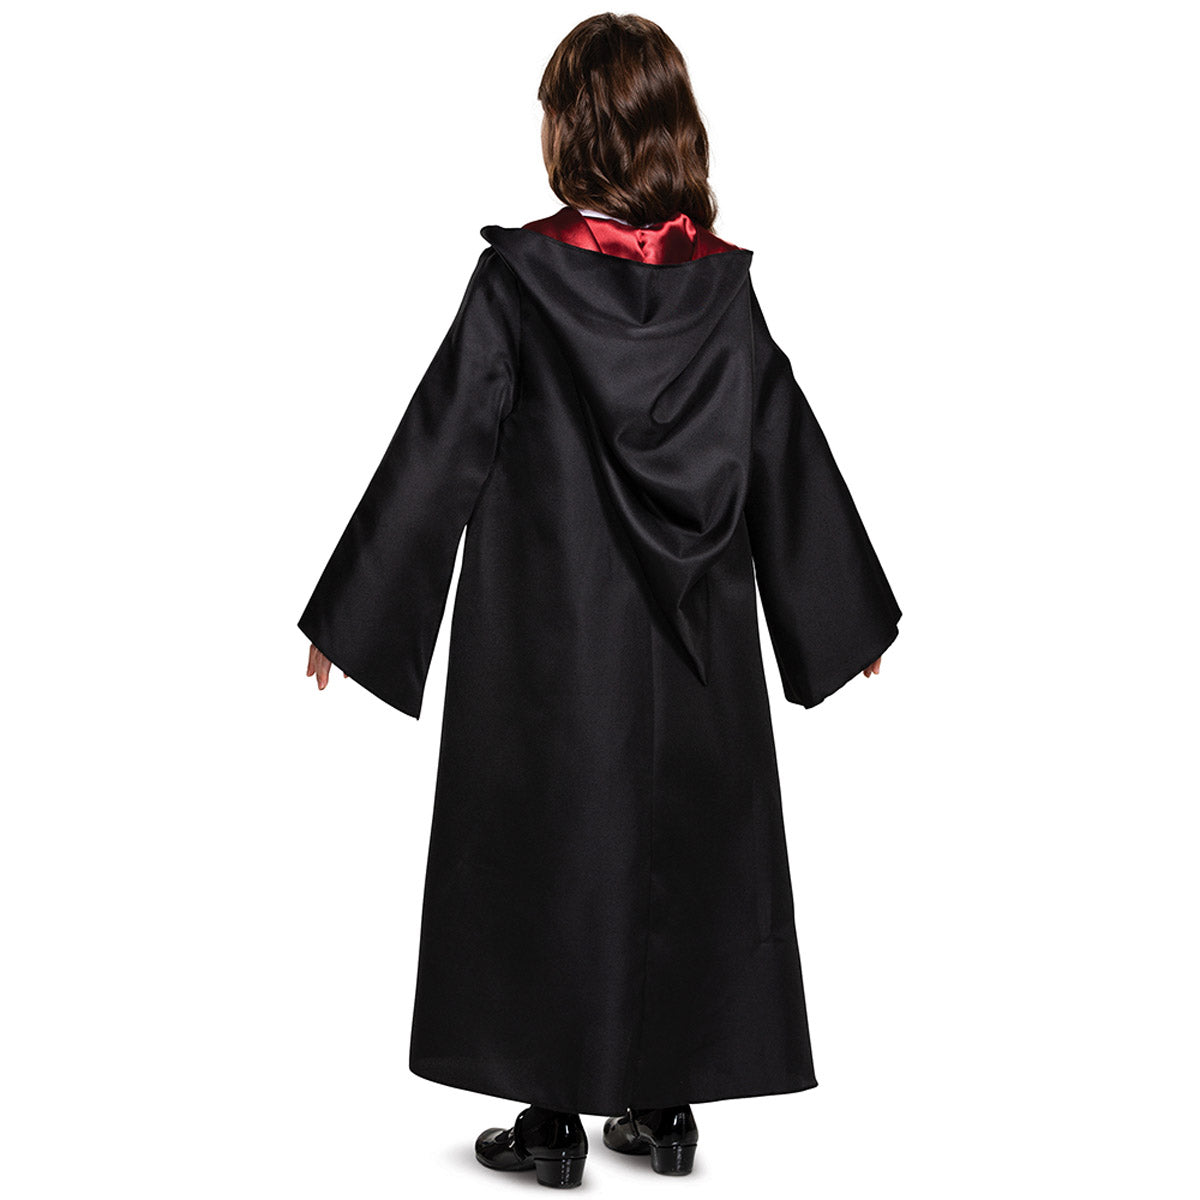 Gryffindor Robe Deluxe Disguise 107889